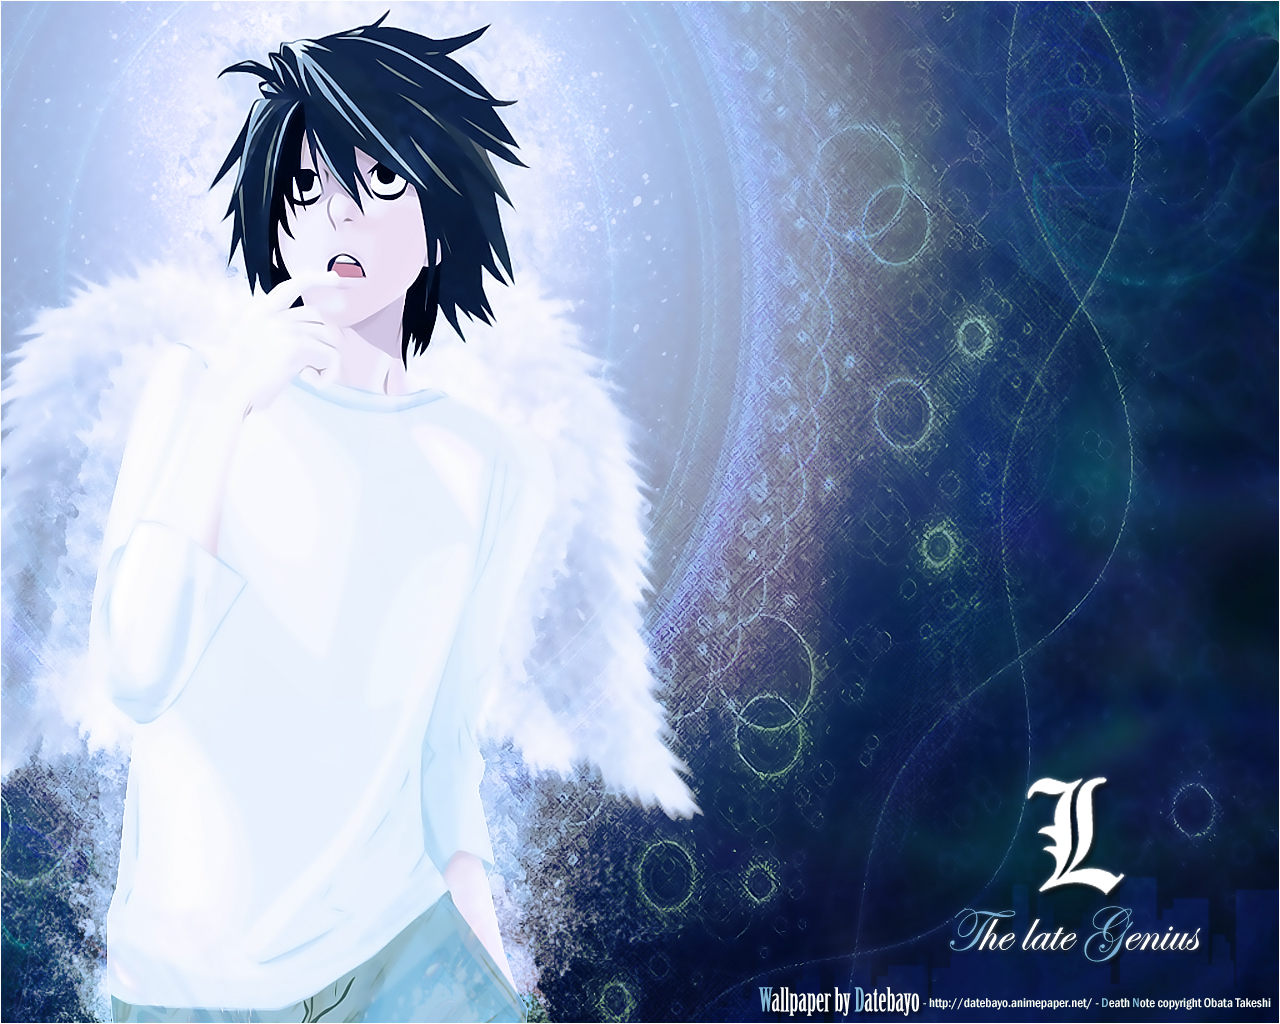 l (death note), anime, death note